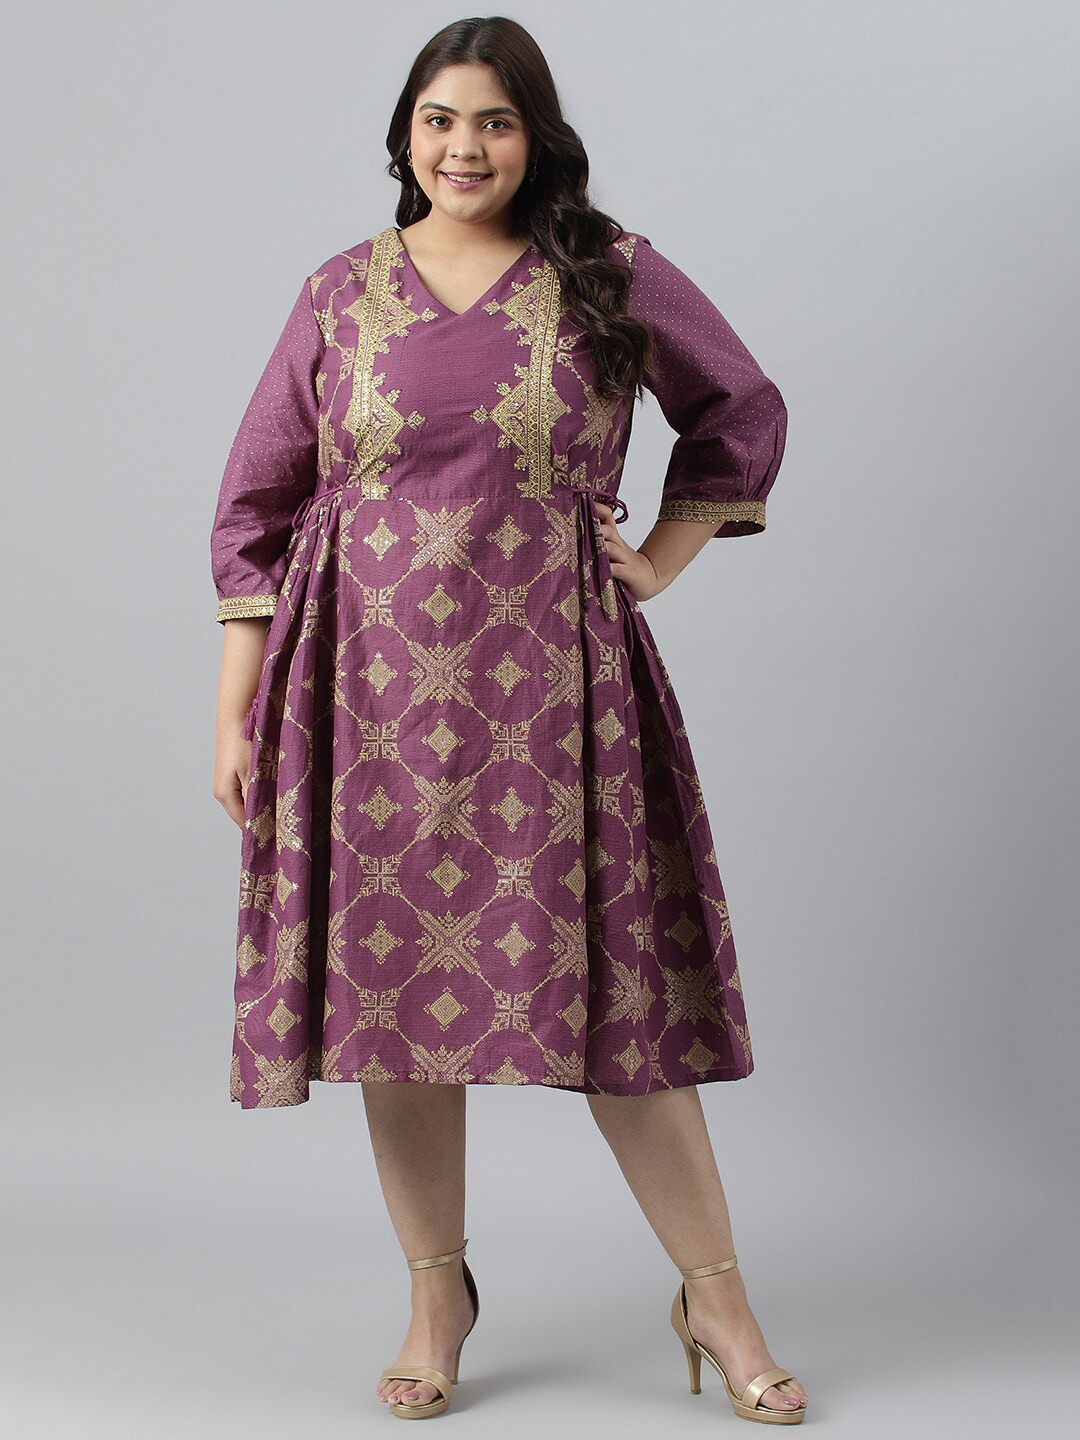 W Plus Size Ethnic Motifs Ethnic A-Line Cotton Dress Price in India